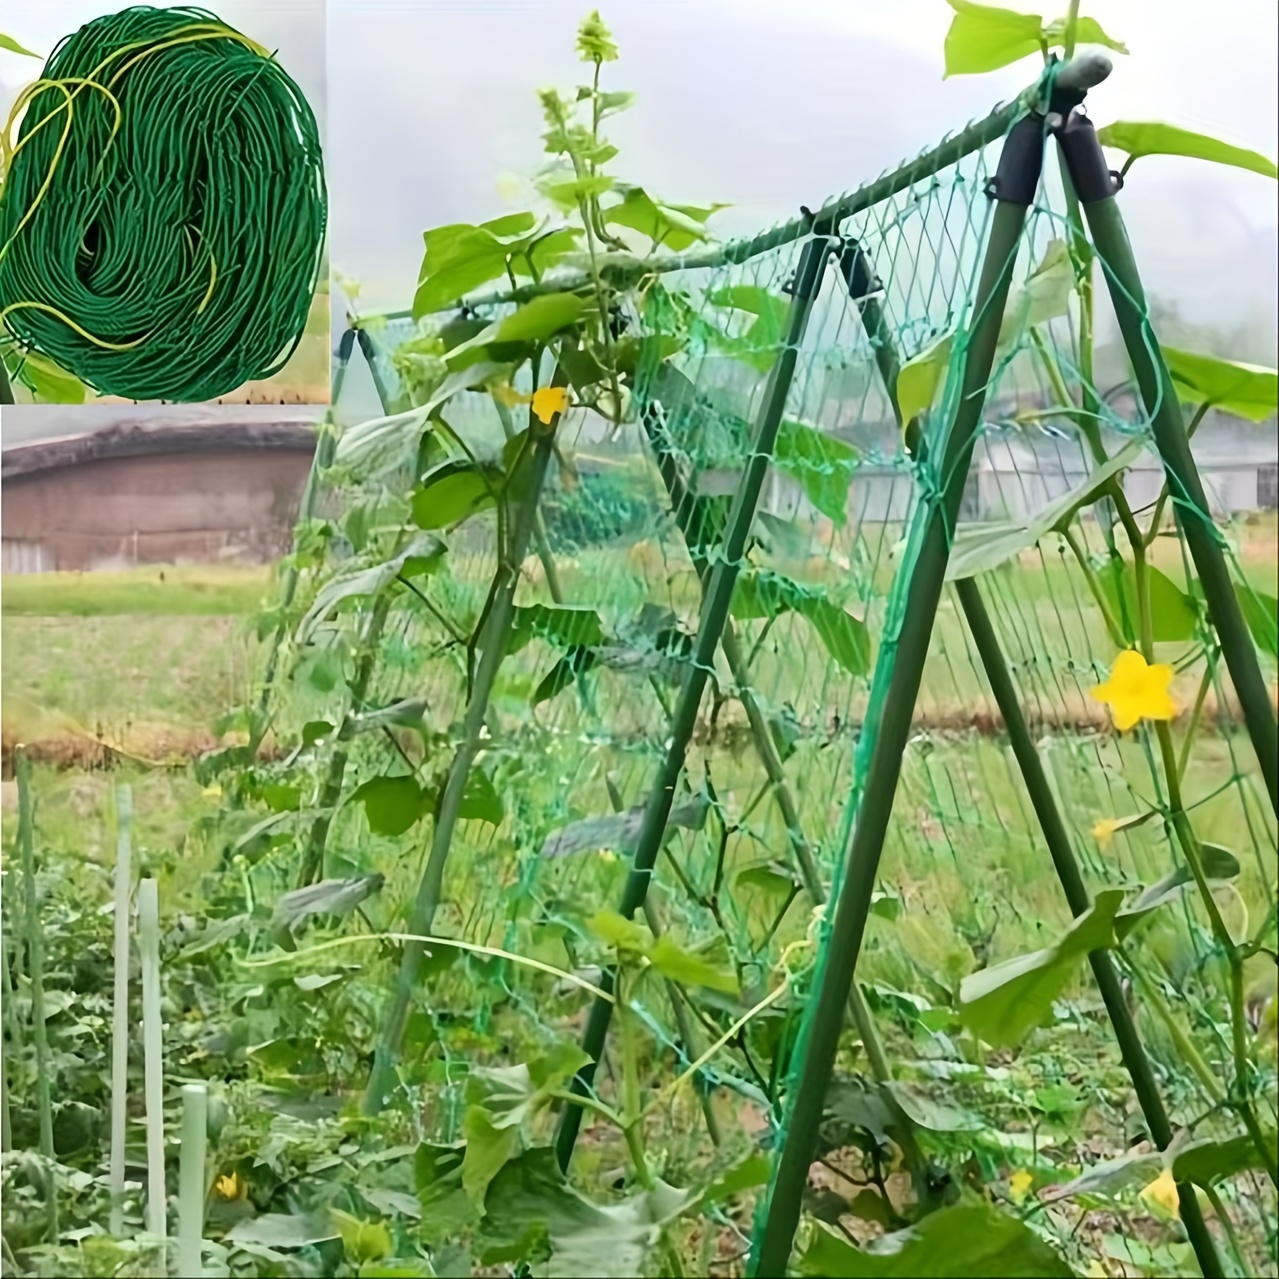 

Heavy-duty Garden Trellis Netting For Climbing Vegetables, Cucumbers & Tomatoes - Strong Support, Durable Plastic, 70.87" X 141.73